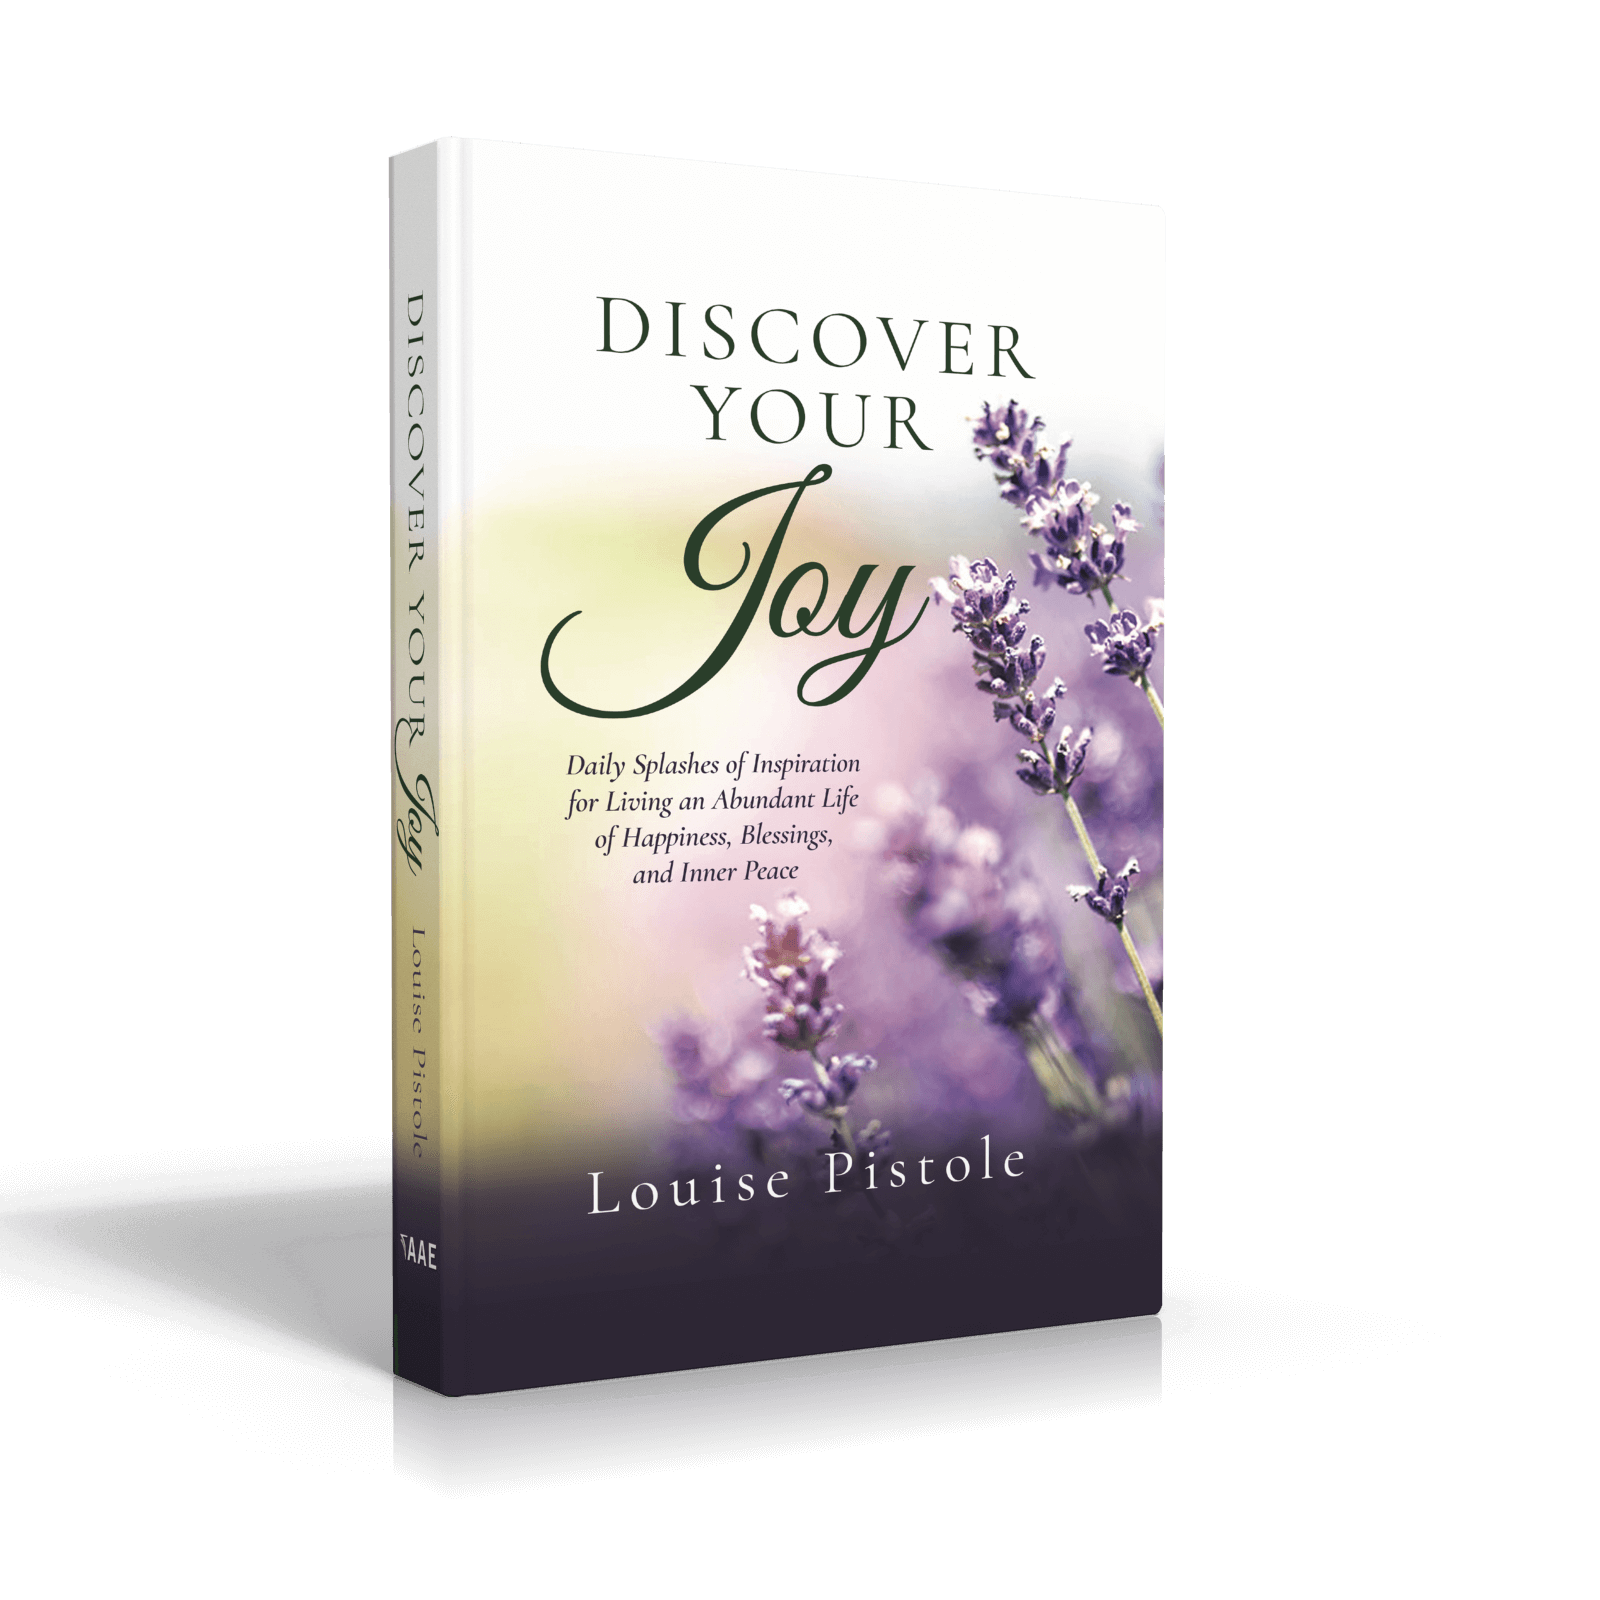 Discover Your Joy book cover